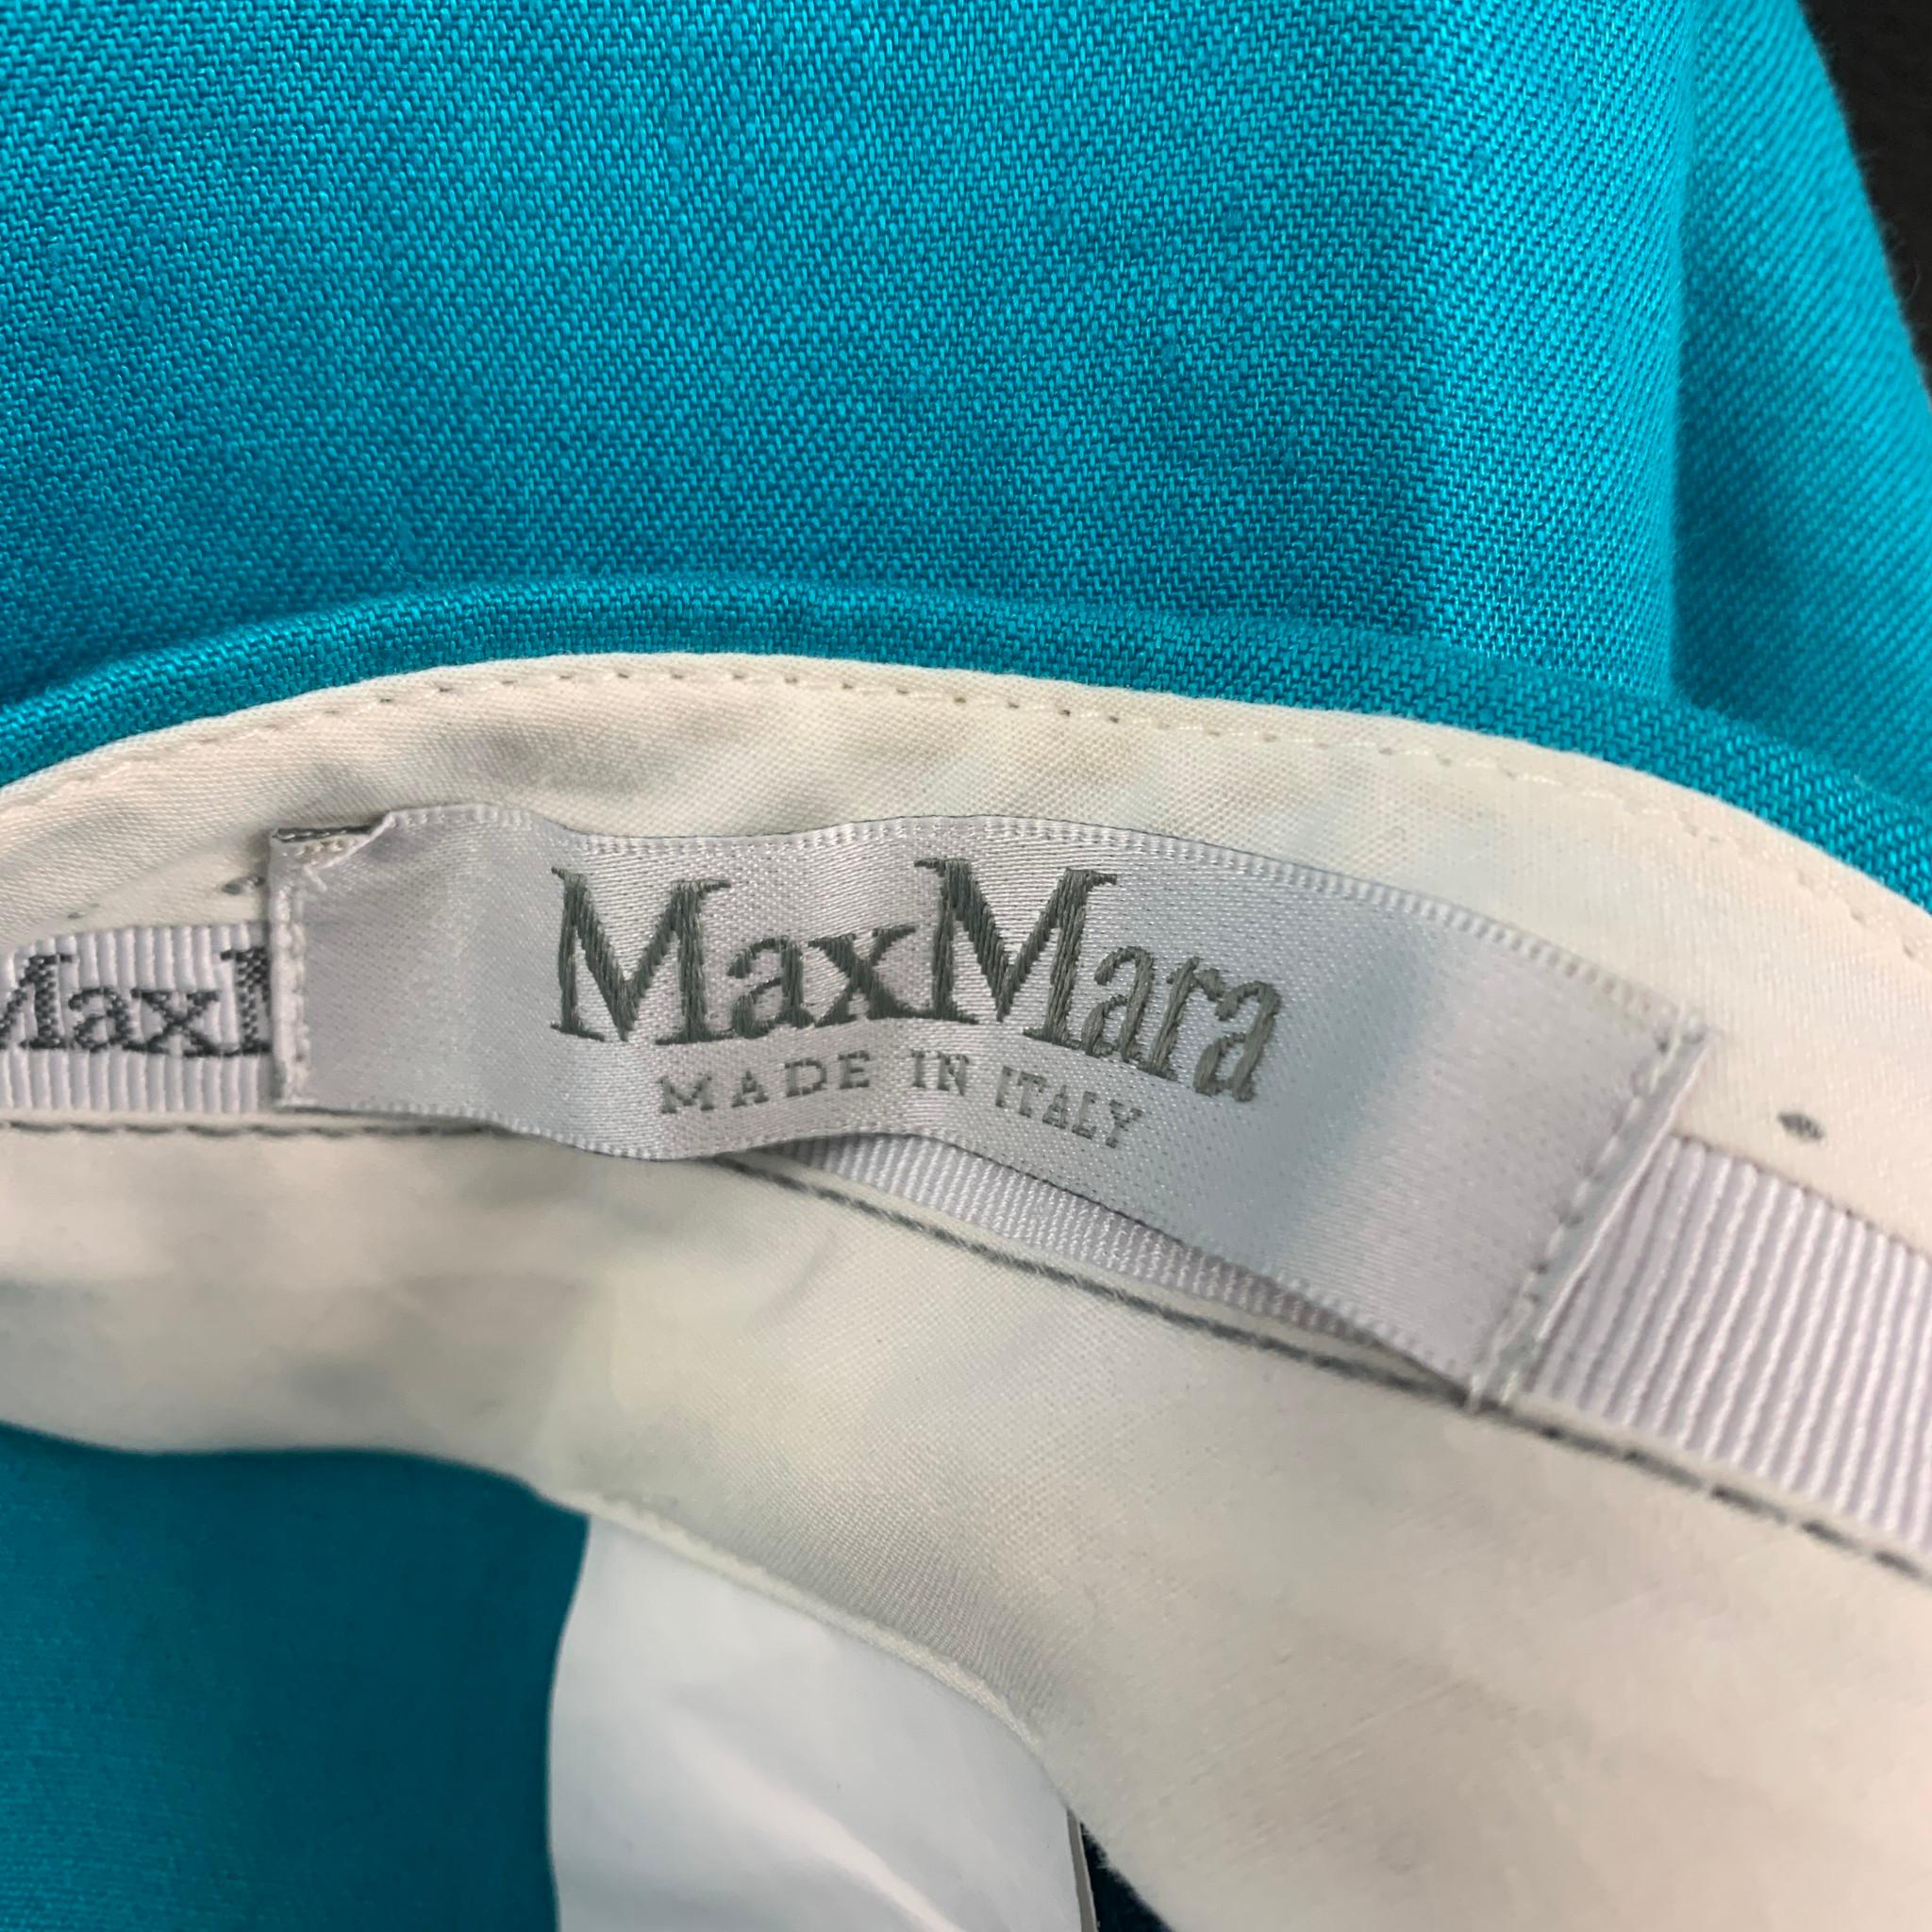 MAX MARA dress pants comes in a blue turquoise linen featuring a straight leg, front tab, and a zip fly closure. Made in Italy. 

Excellent Pre-Owned Condition.
Marked: CH 36 / USA 6 / FB 38 / MEX 28 / GB 8 / IJ 40

Measurements:

Waist: 30